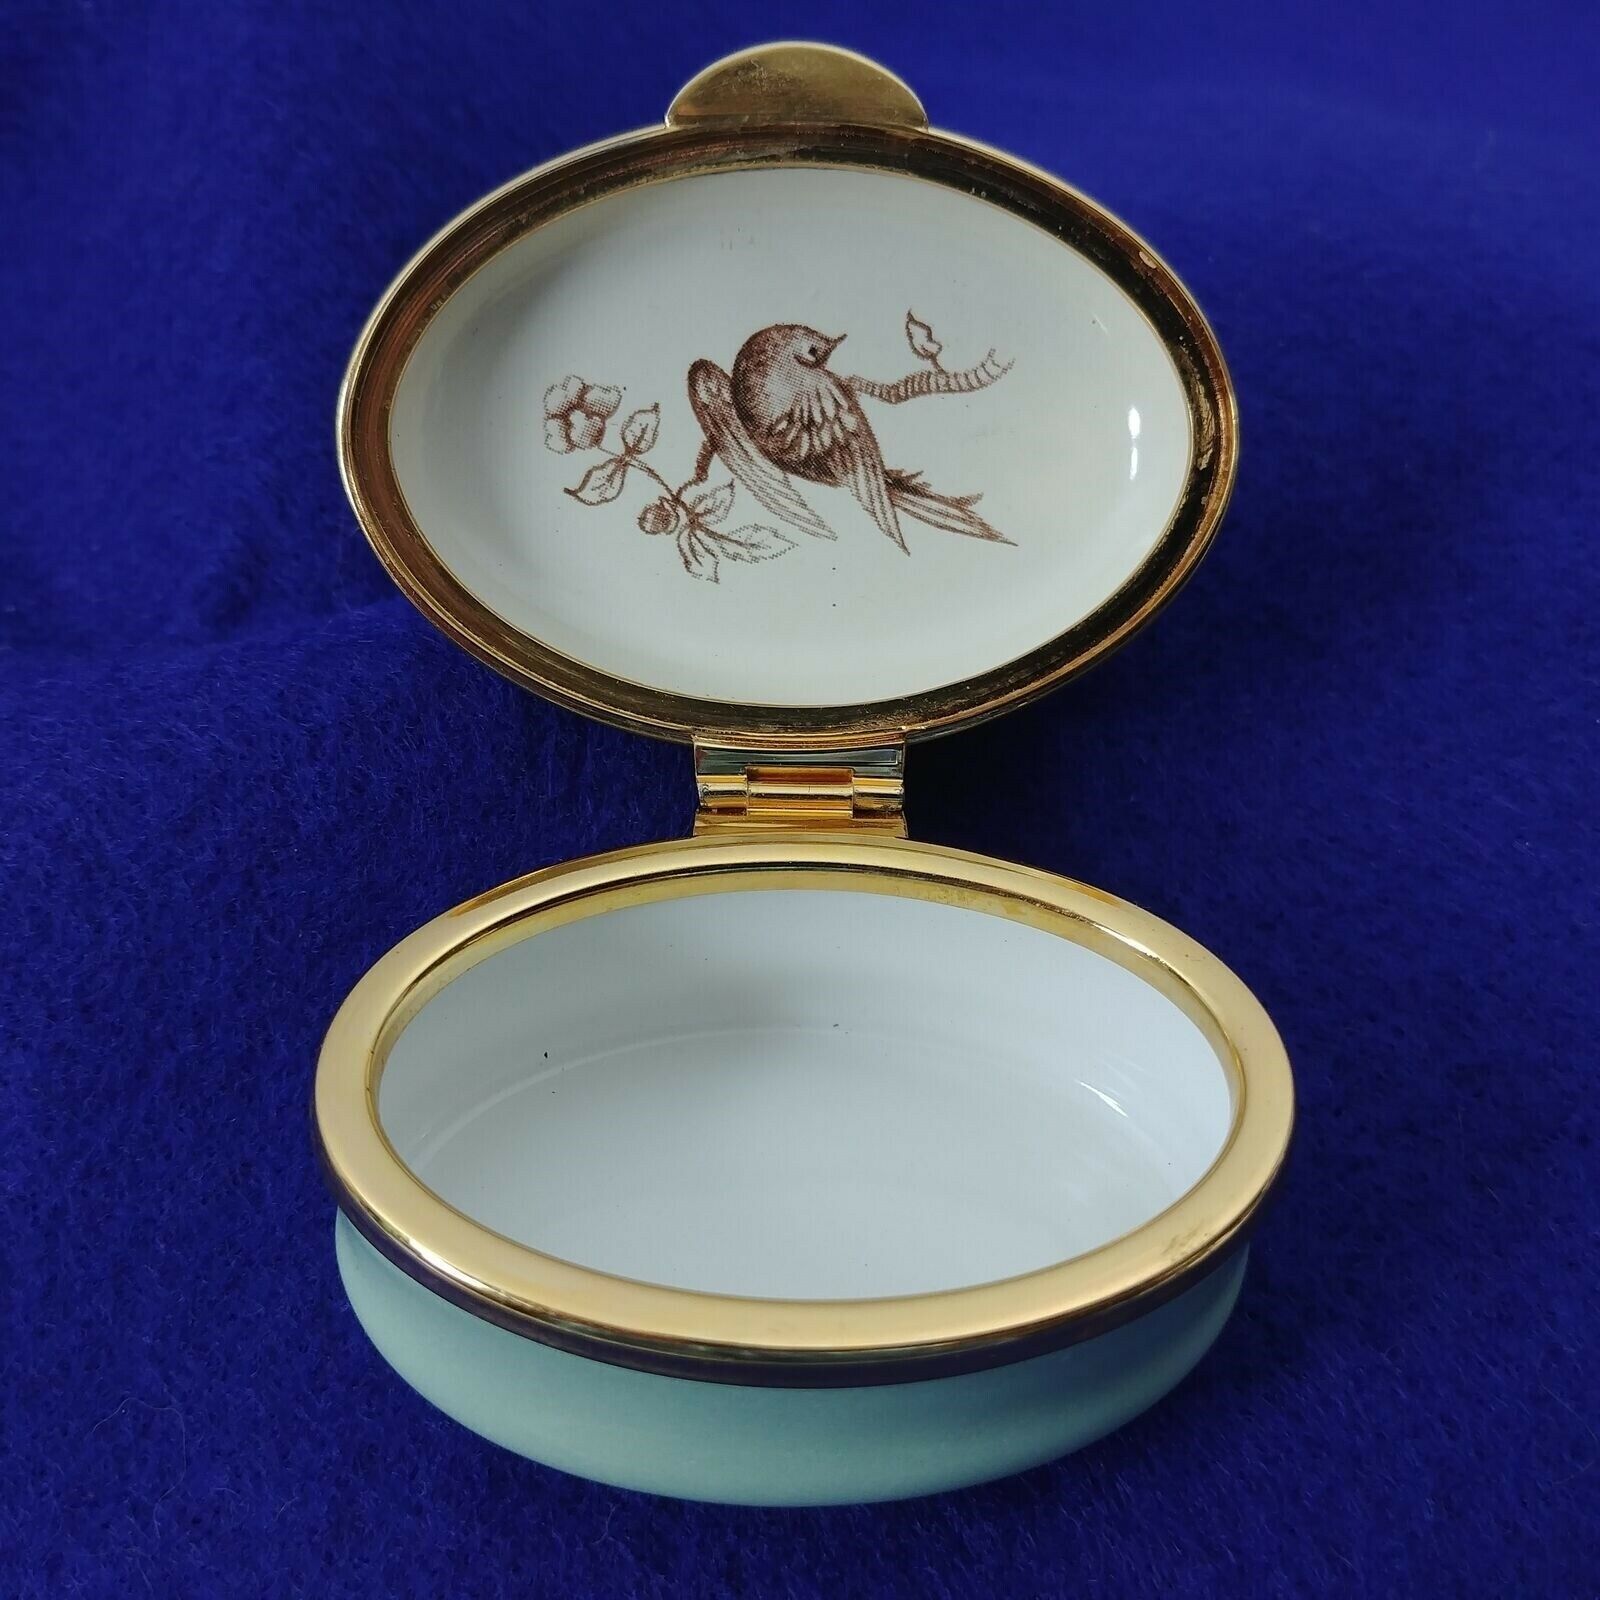 The Staffordshire Enamels 